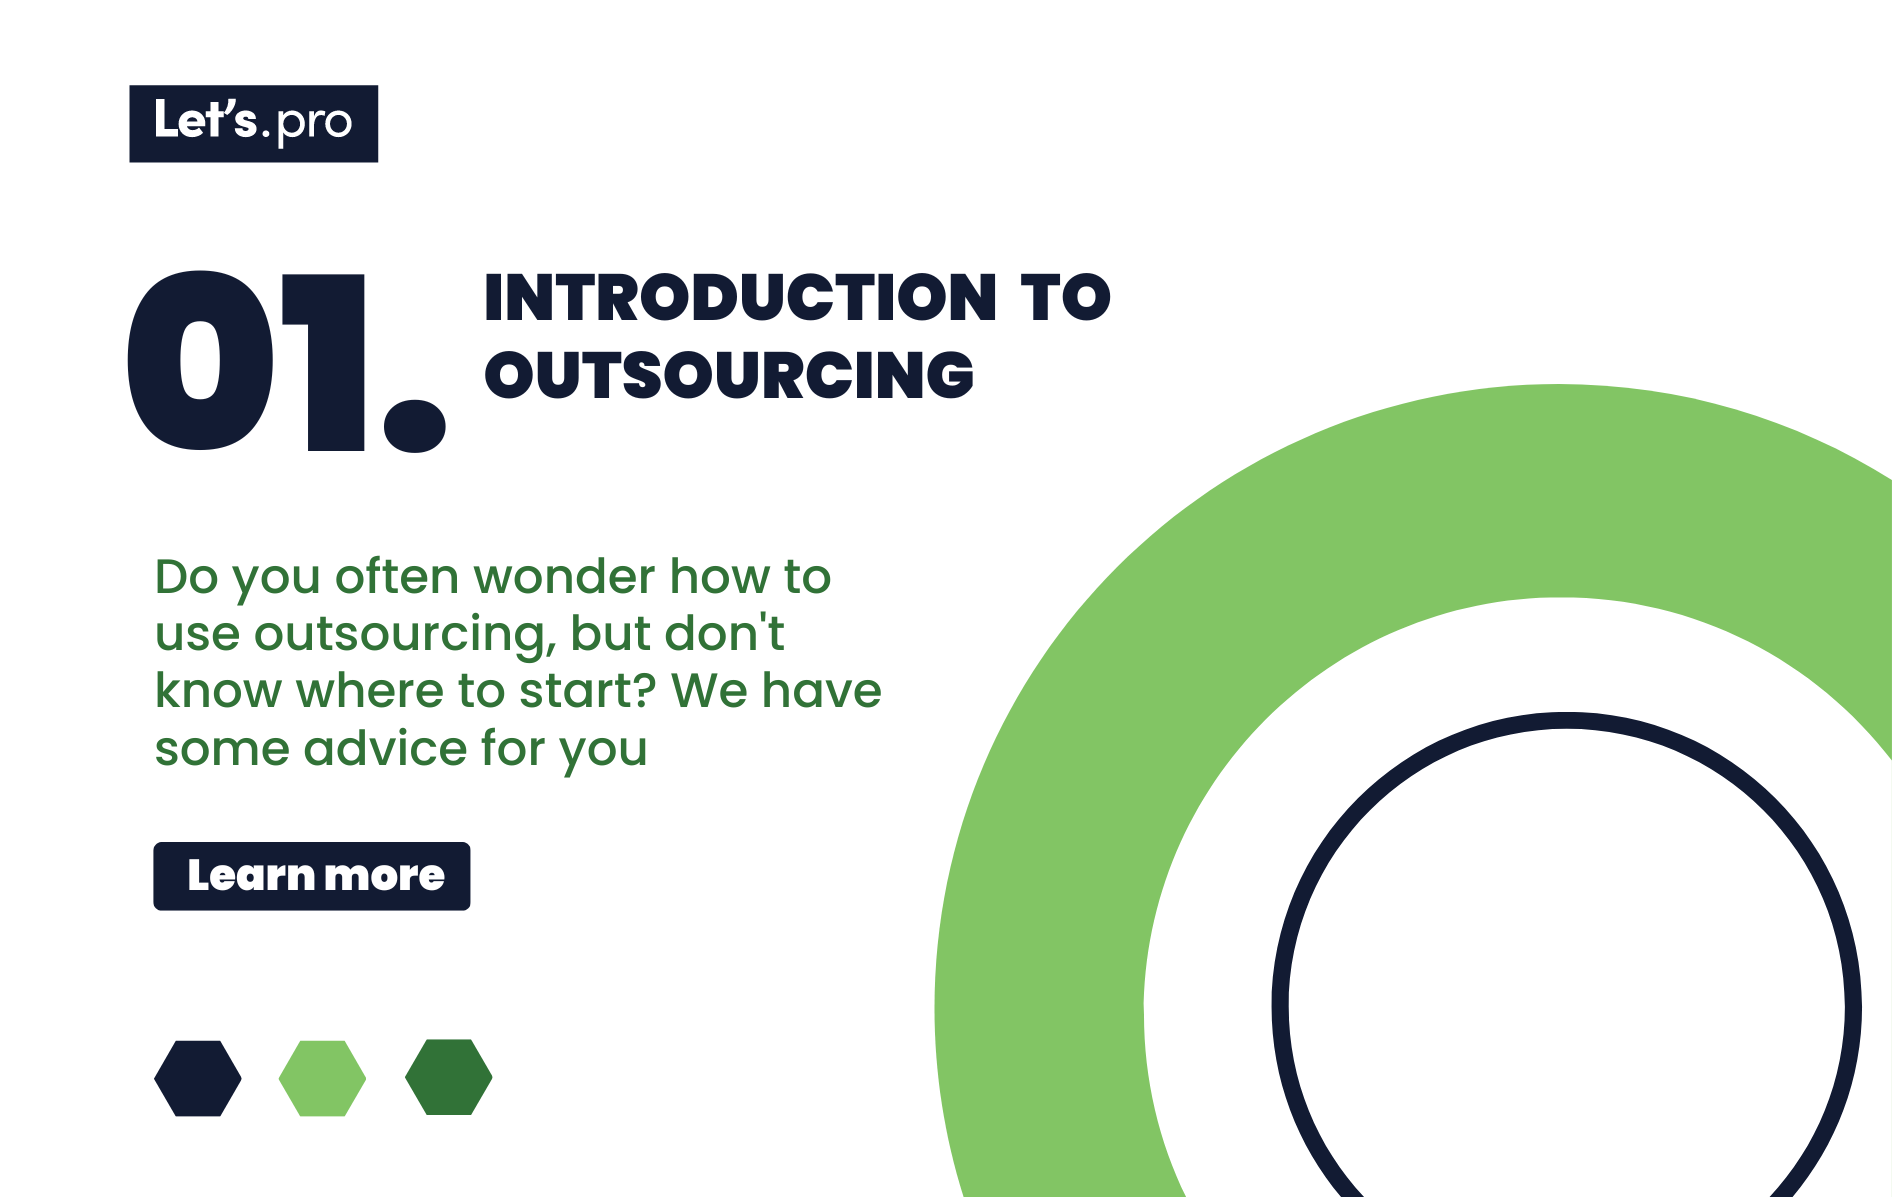 What Exactly is Outsourcing and How to Use it in Practice?